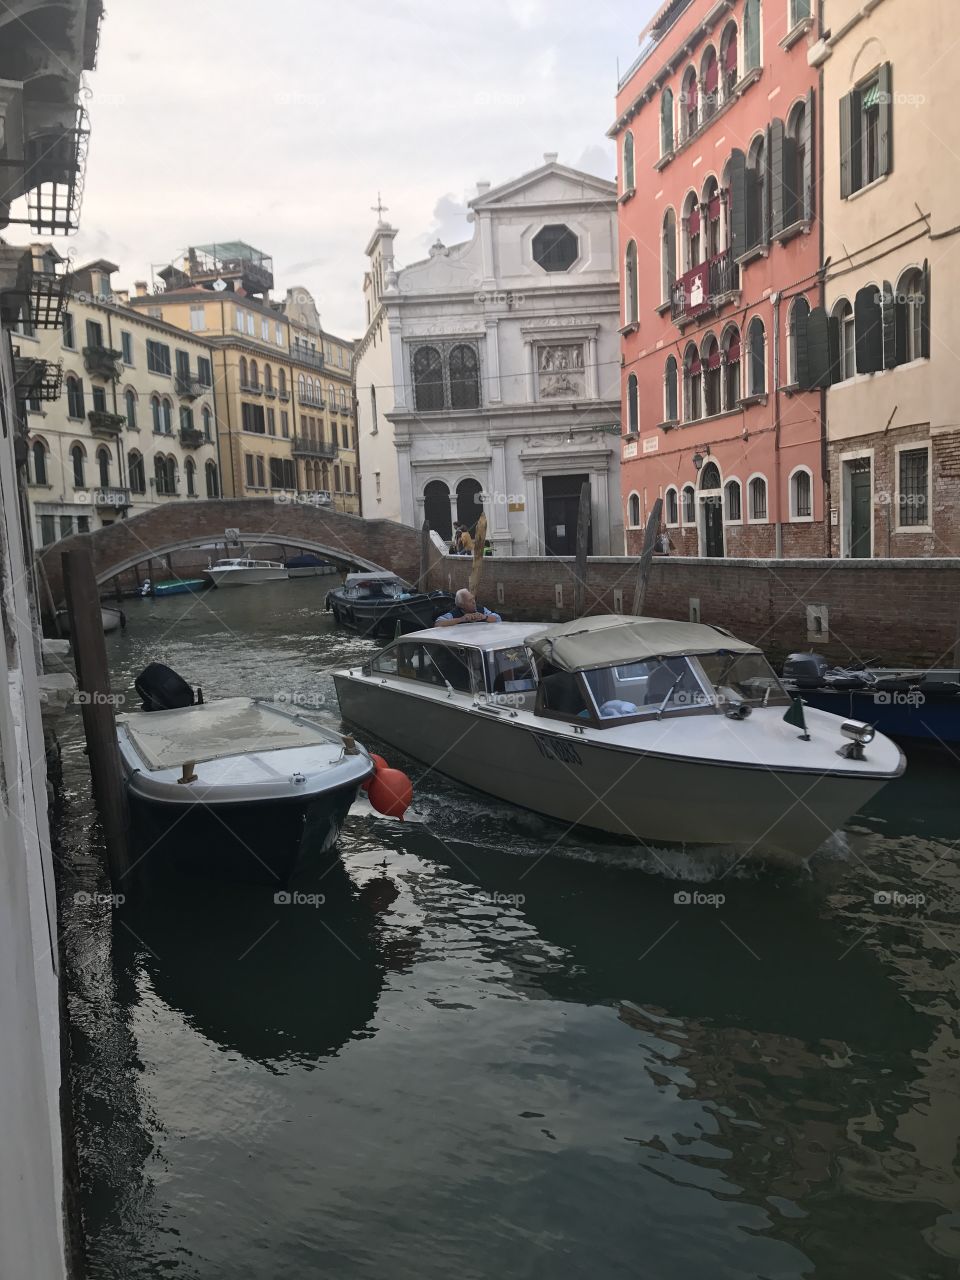 In love with Venice